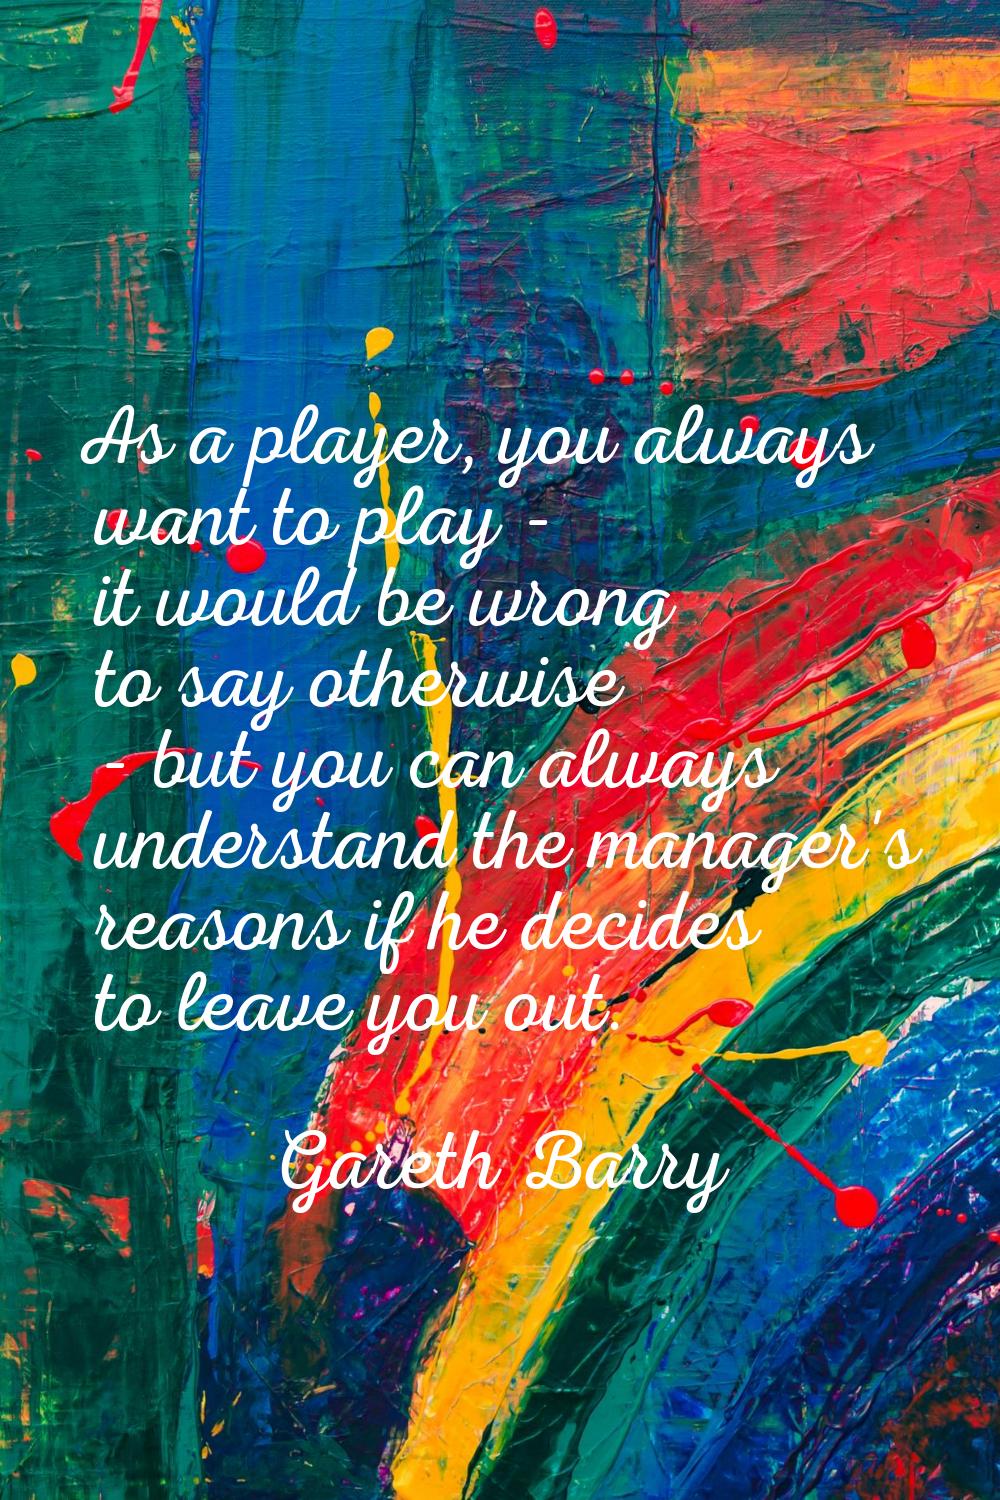 As a player, you always want to play - it would be wrong to say otherwise - but you can always unde